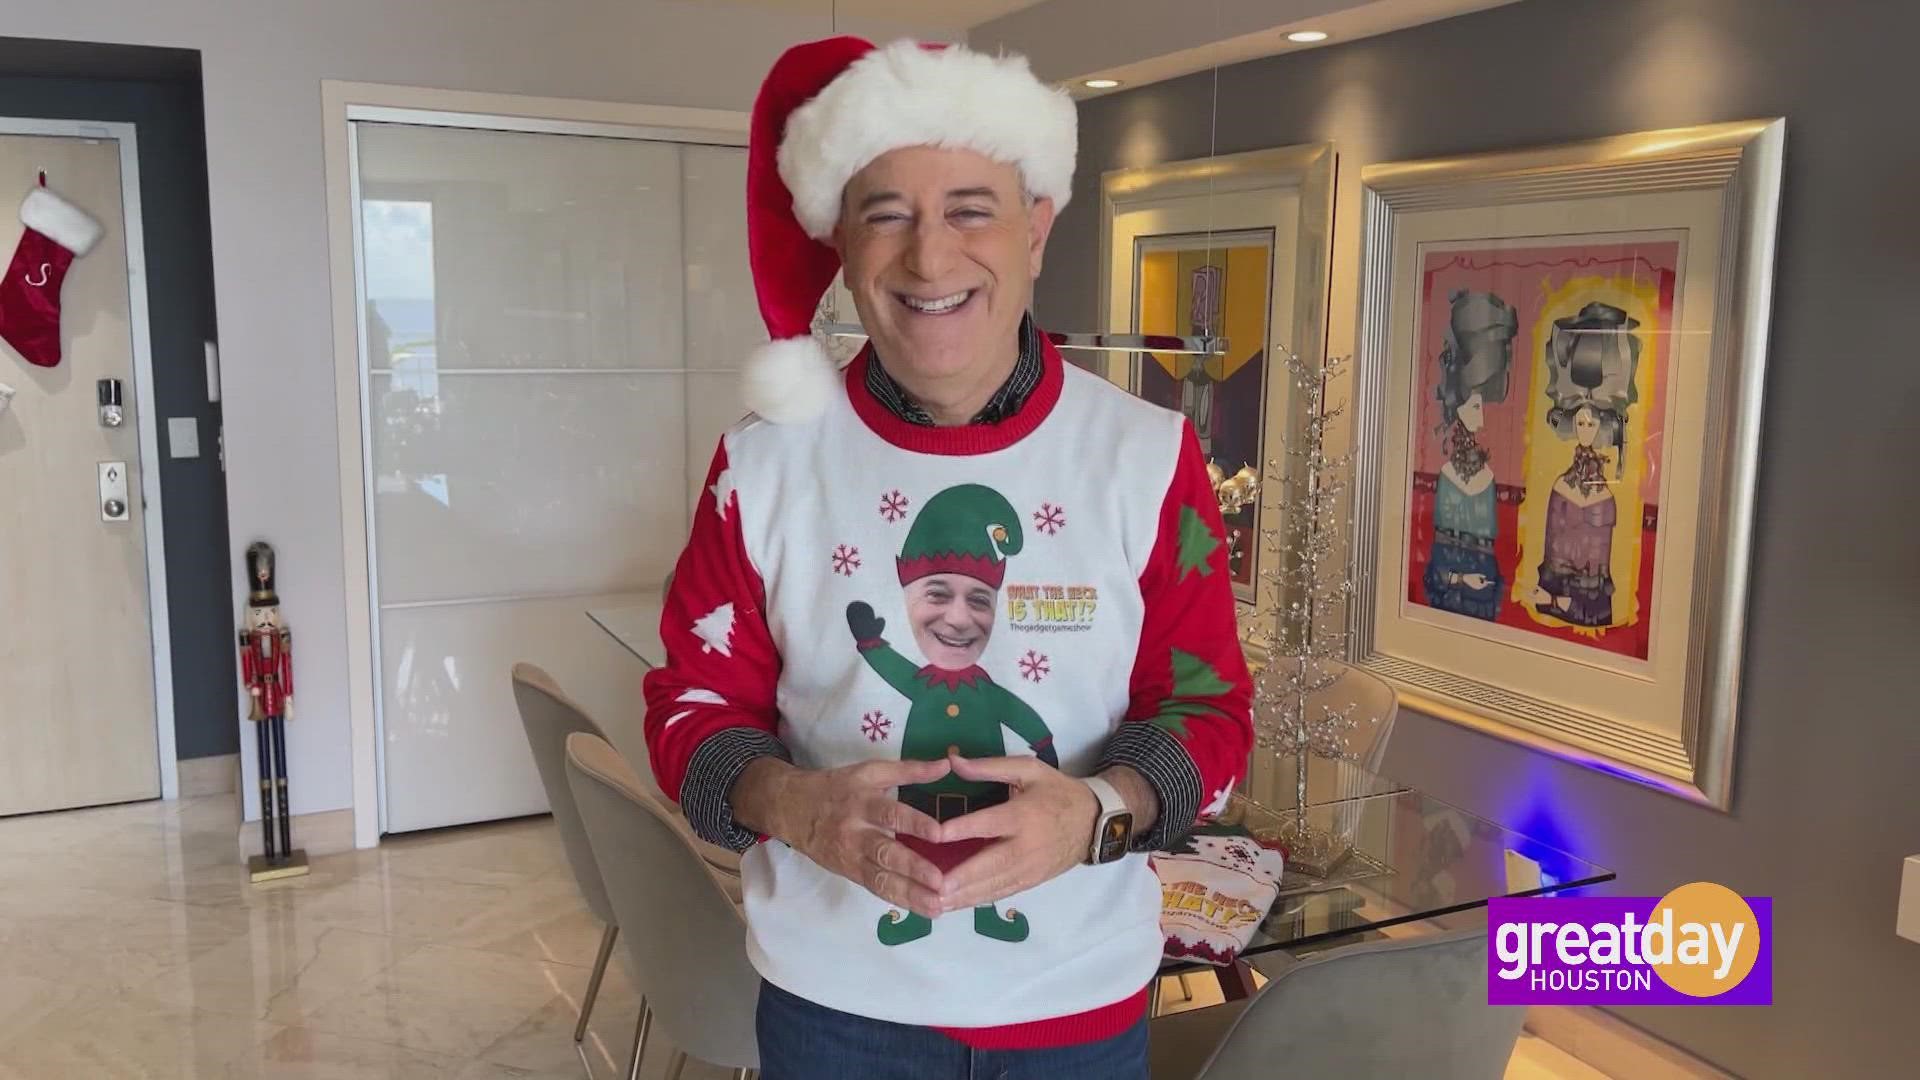 Now's the time to get your holiday shopping done, and "Gadget Guy" Steve Greenberg has the perfect gift ideas.